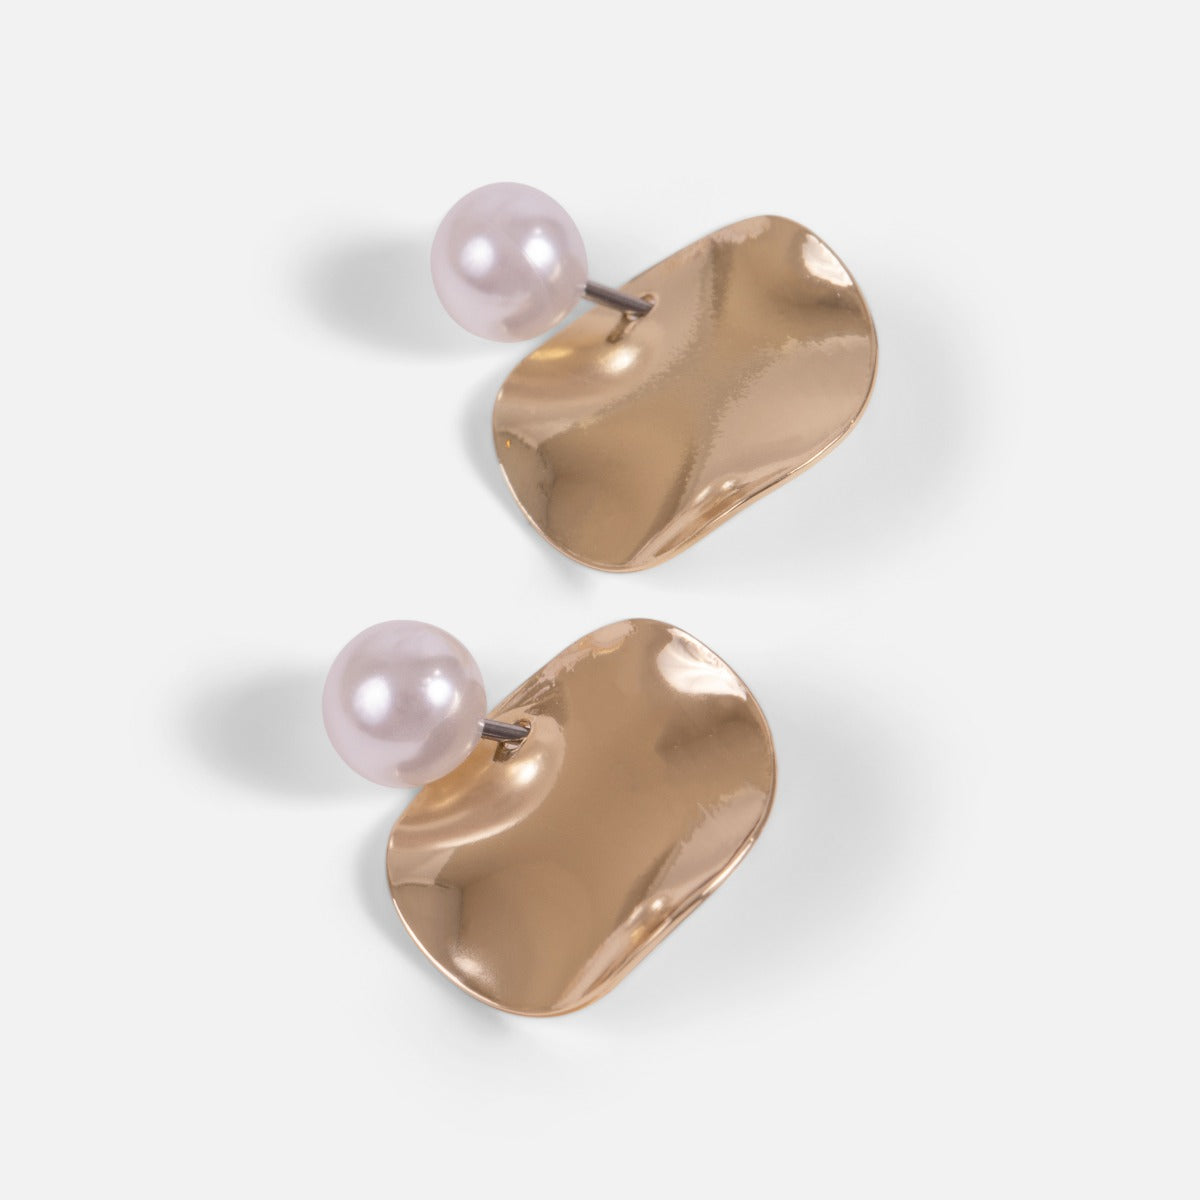 Small fixed earrings with golden disc and pearl